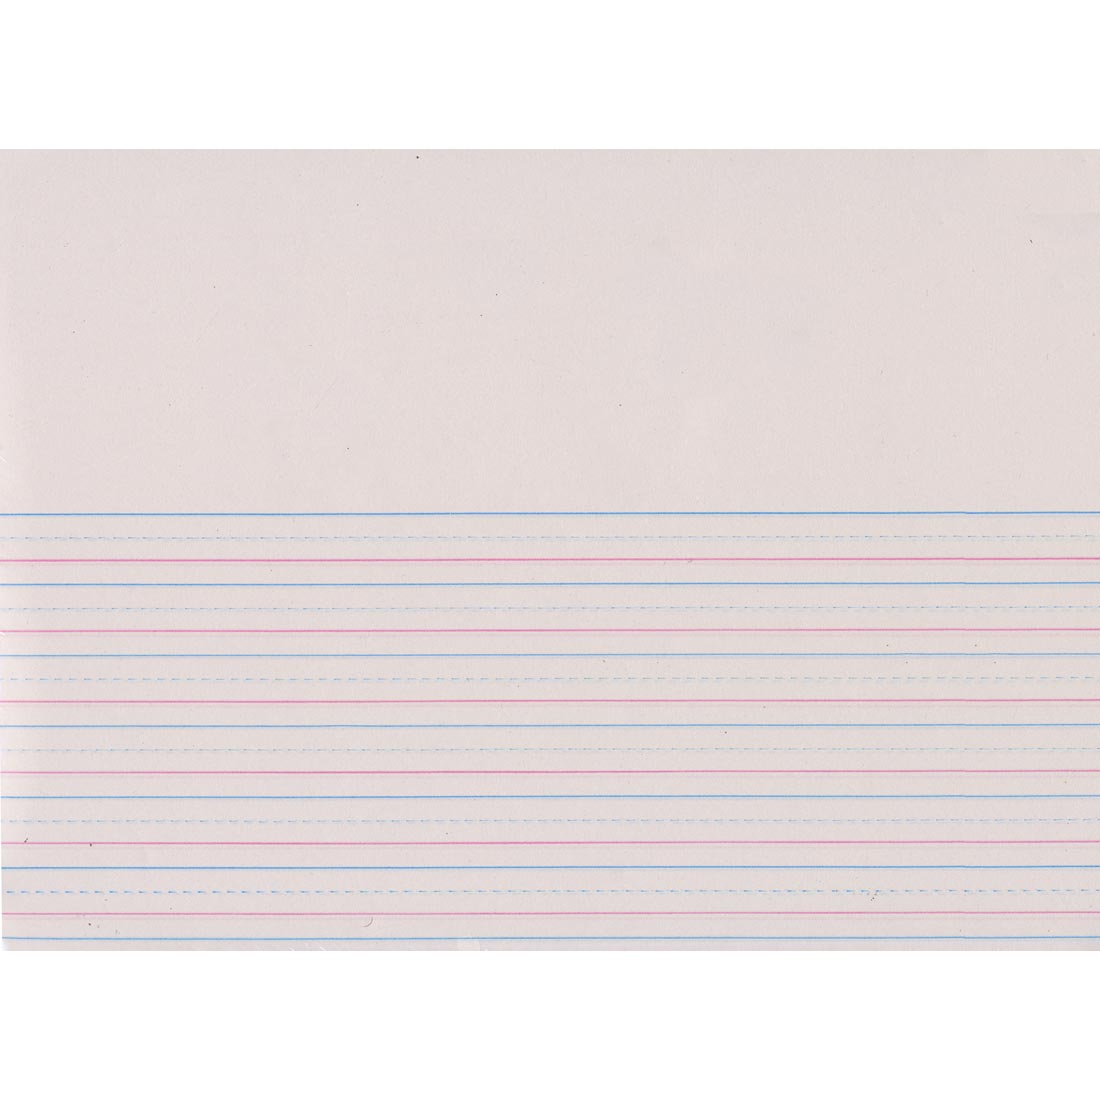 Multi-Program Picture Story Paper #2, showing a single sheet